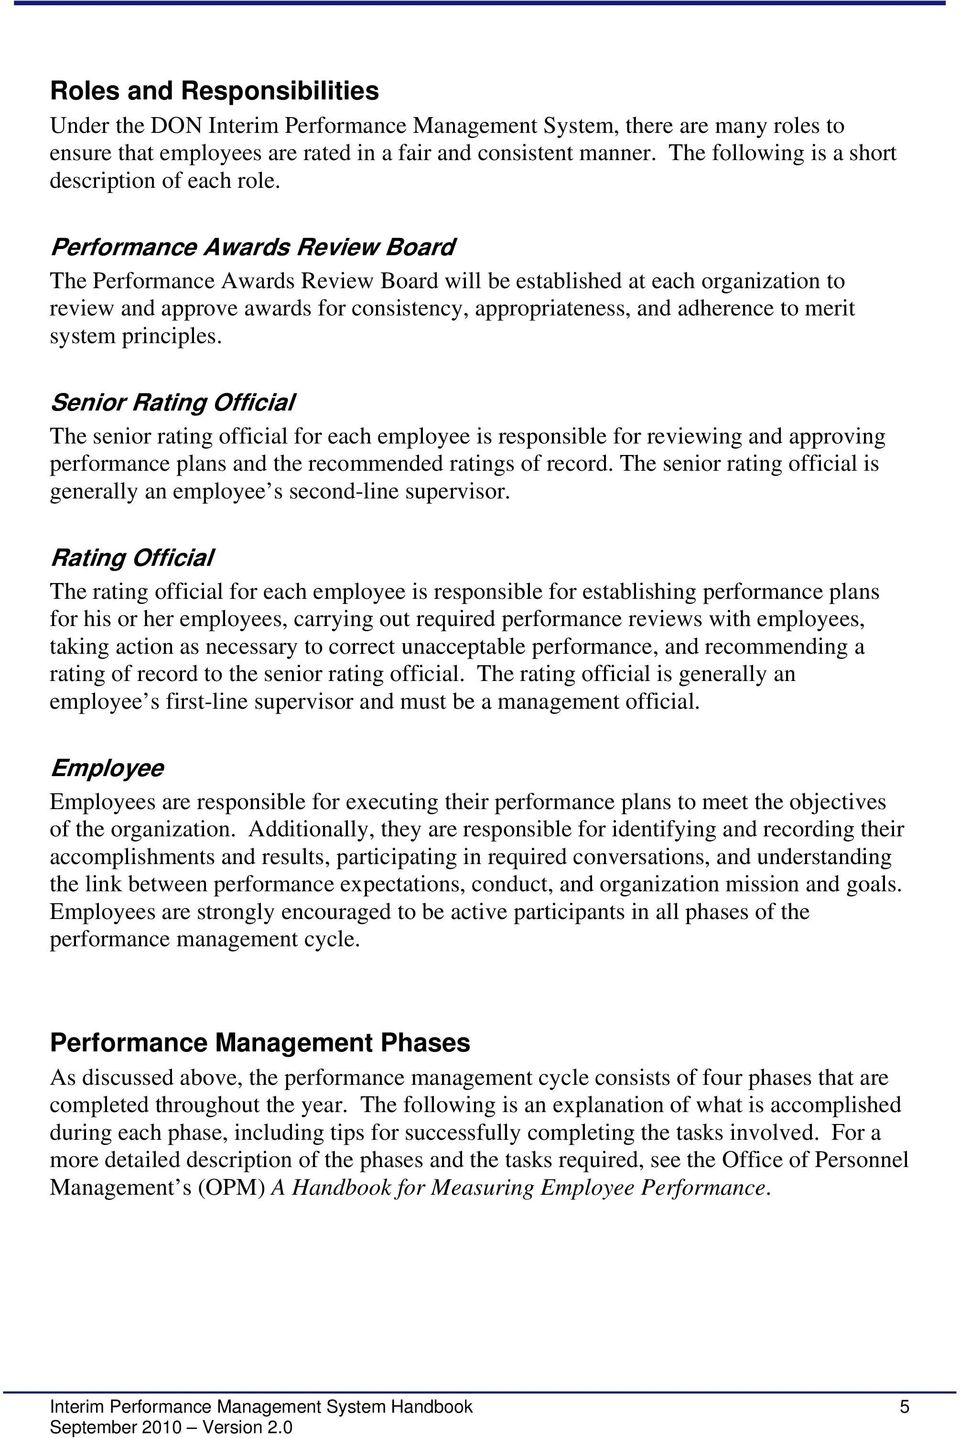 Performance Awards Review Board The Performance Awards Review Board will be established at each organization to review and approve awards for consistency, appropriateness, and adherence to merit